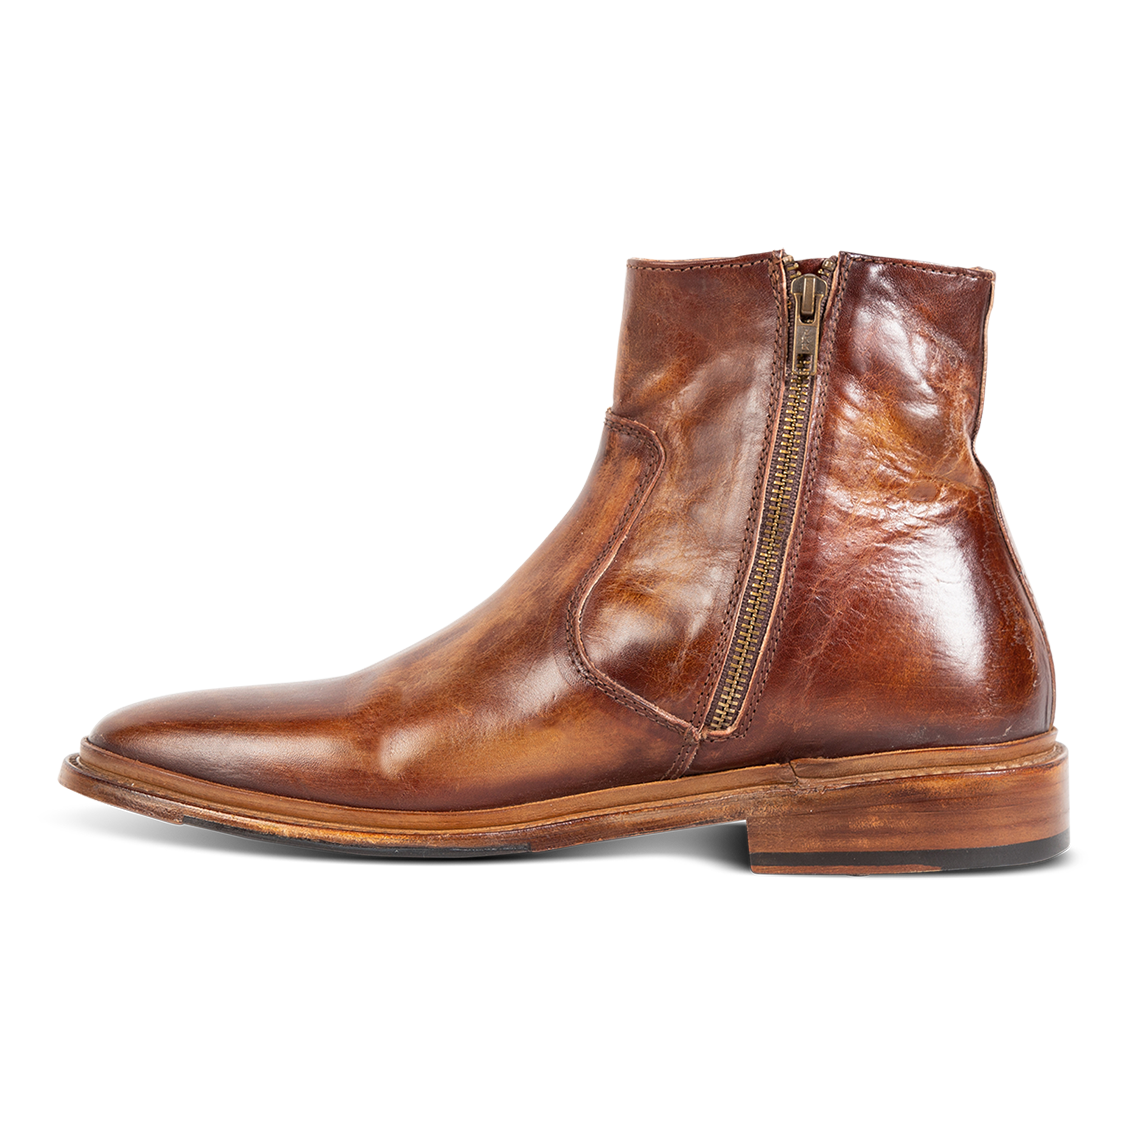 Inside view showing working zip closure and stitch detailing on FREEBIRD men's Douglas cognac ankle boot